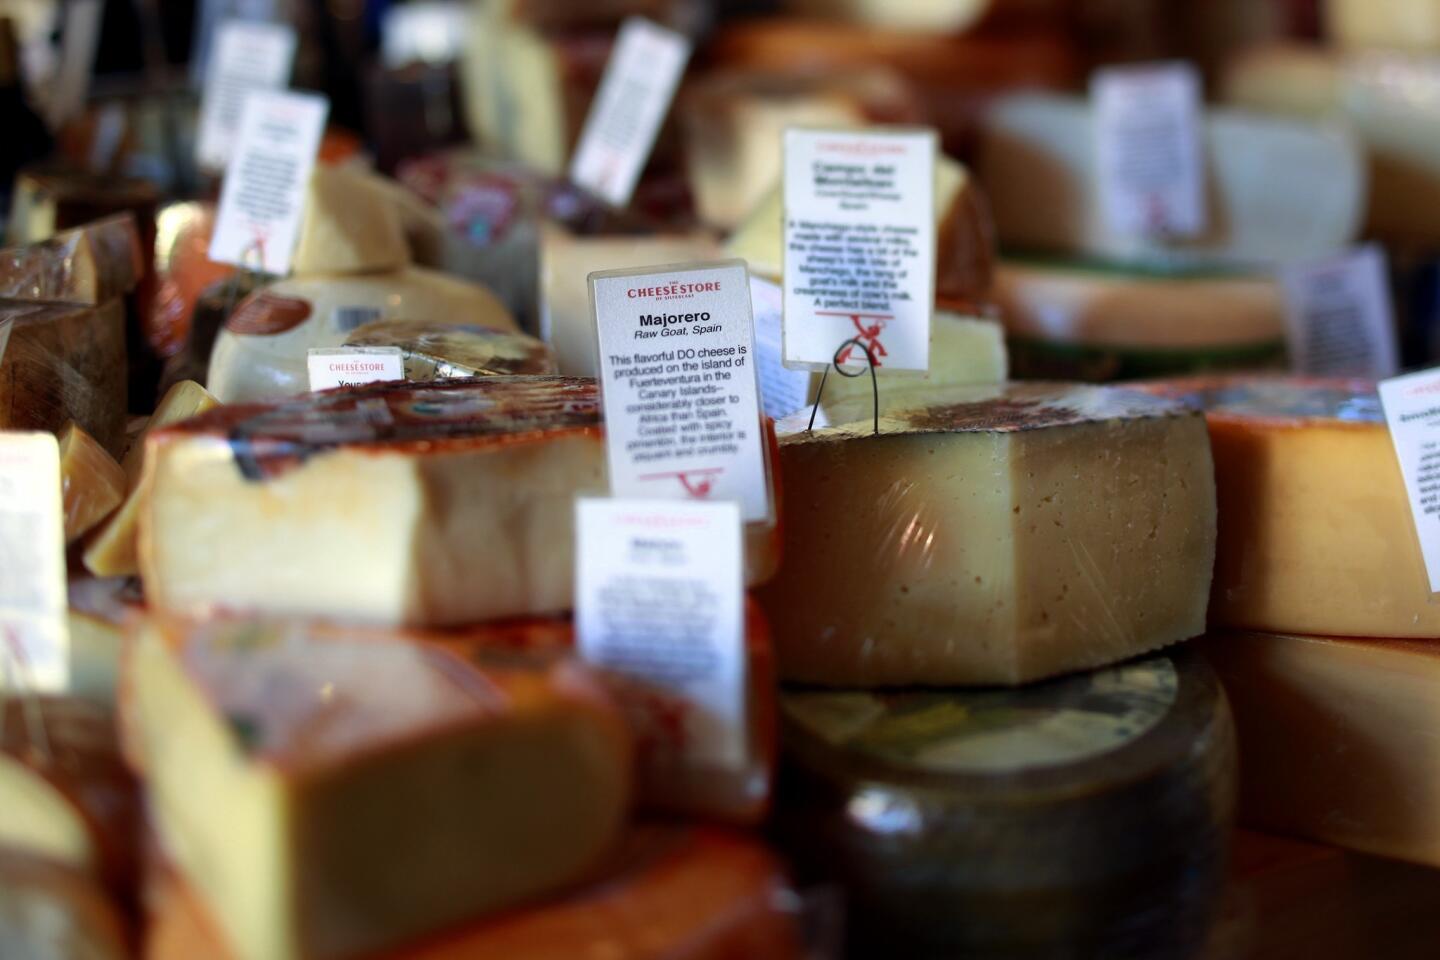 The cheese shop is stocked with cheeses, wine and a small selection of pantry goods. The wraparound cheese case is always laden with a comprehensive mix of imported and domestic cheeses. And cheesy sandwiches abound.